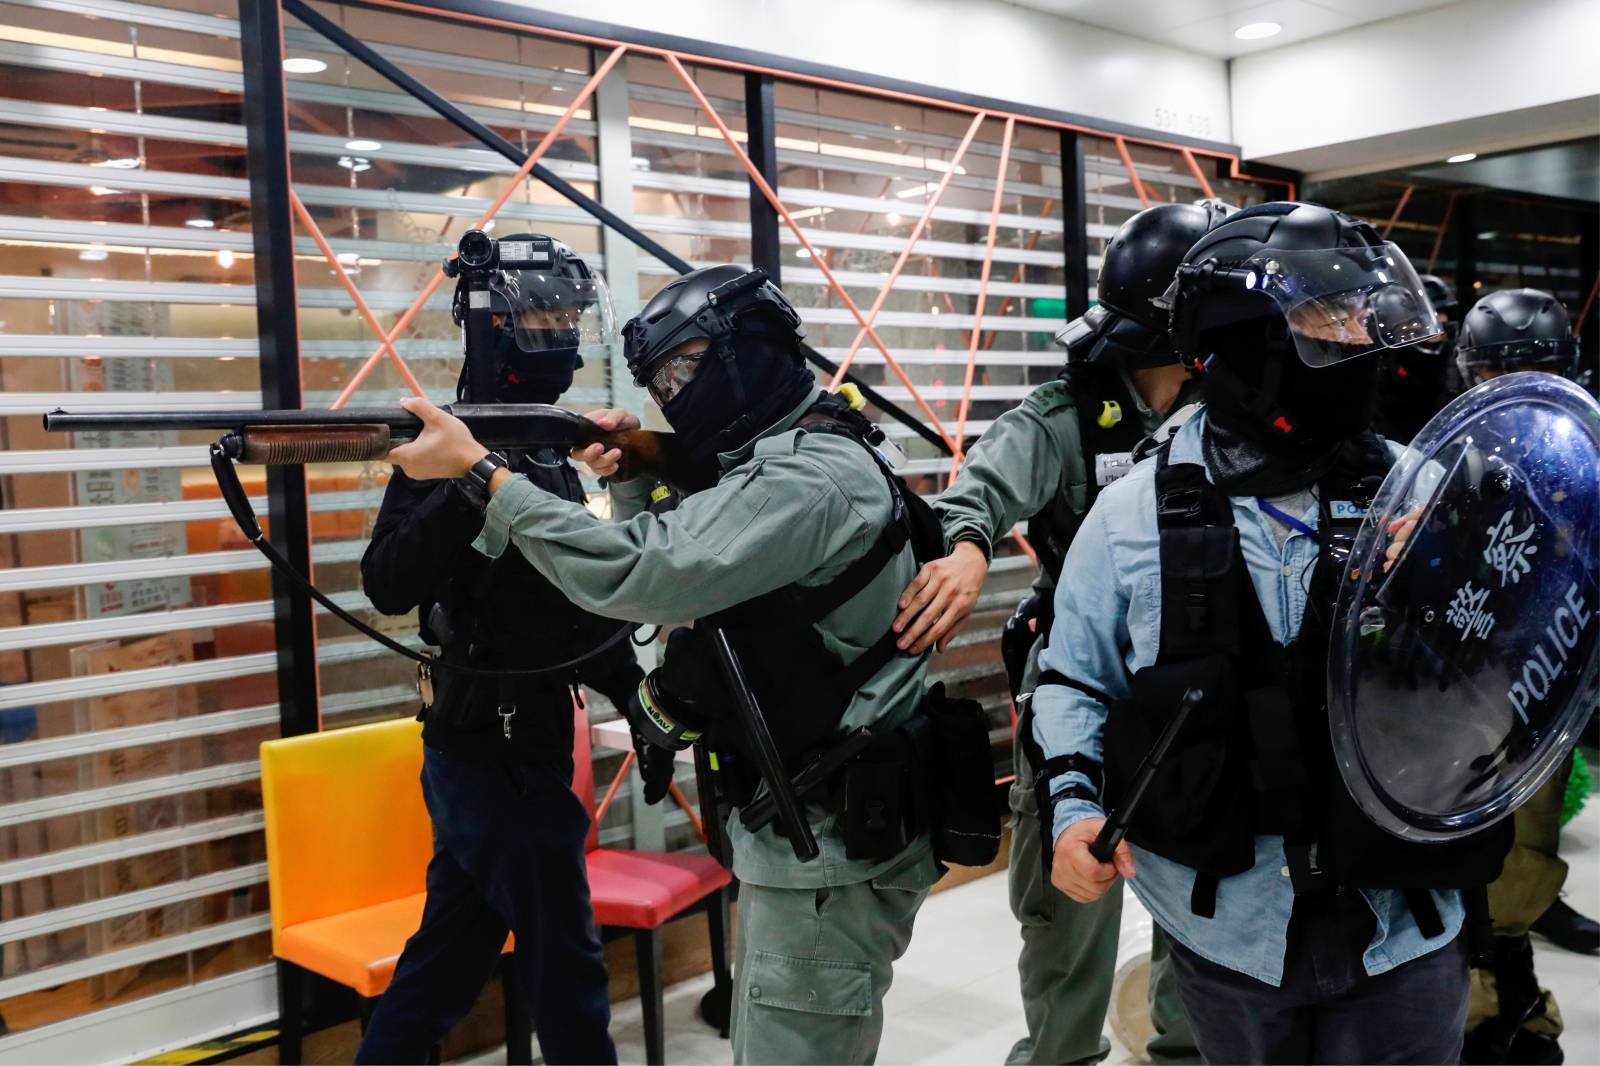 Riot police hold a rifle as they disperse anti-government protesters at shopping mall in Tai Po, Hong Kong